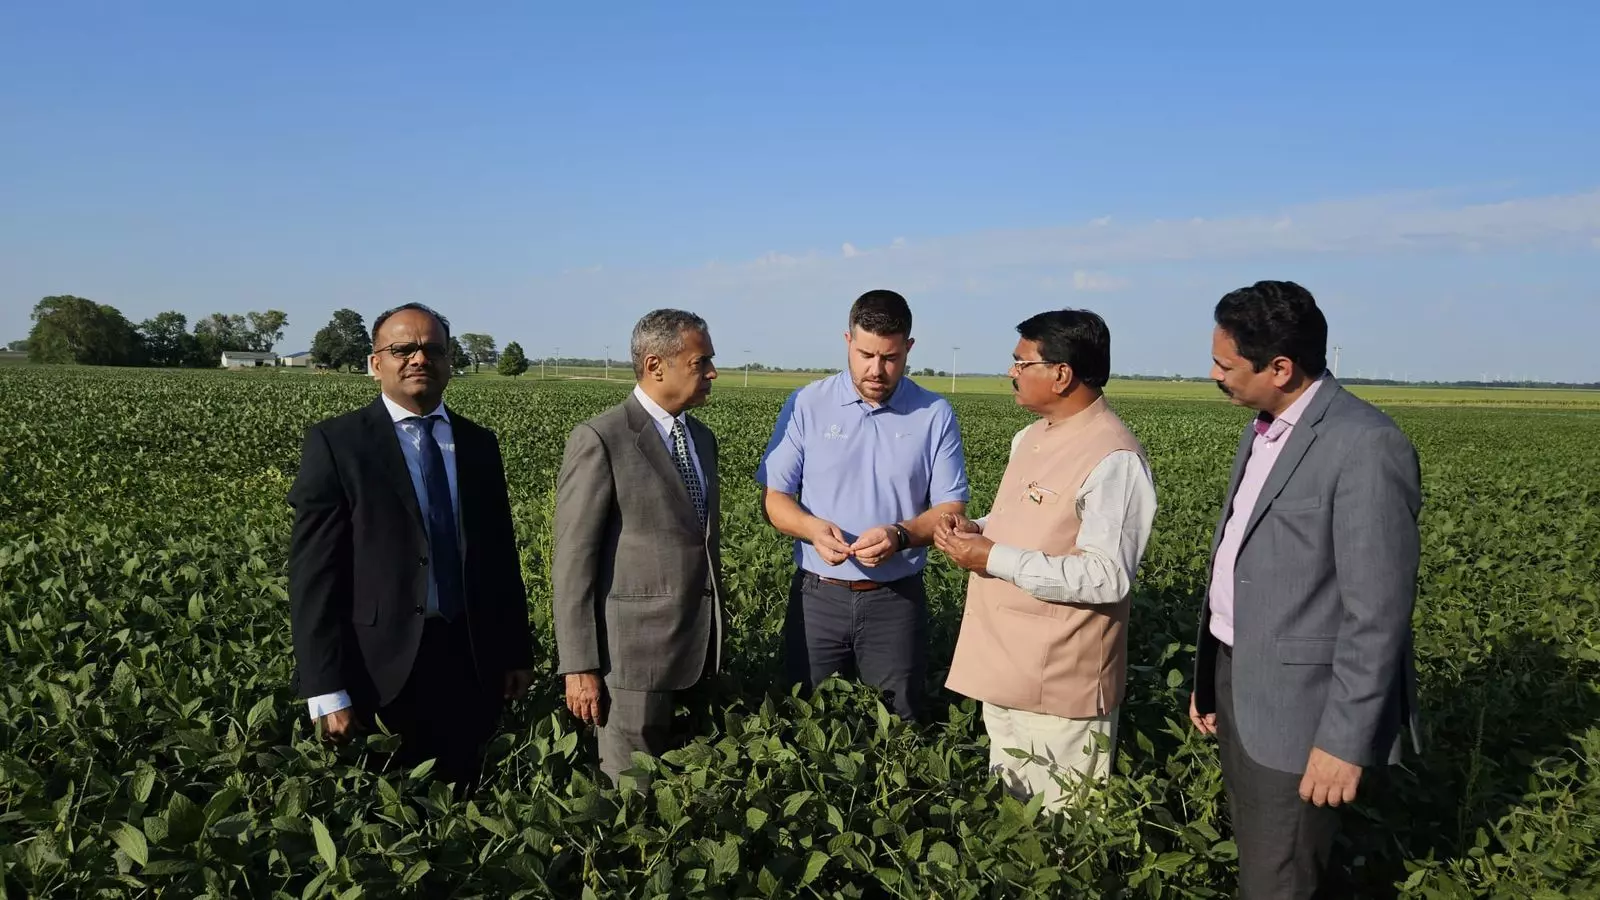 Telangana aims to promote agriculture model at global Level: Minister Niranjan Reddy